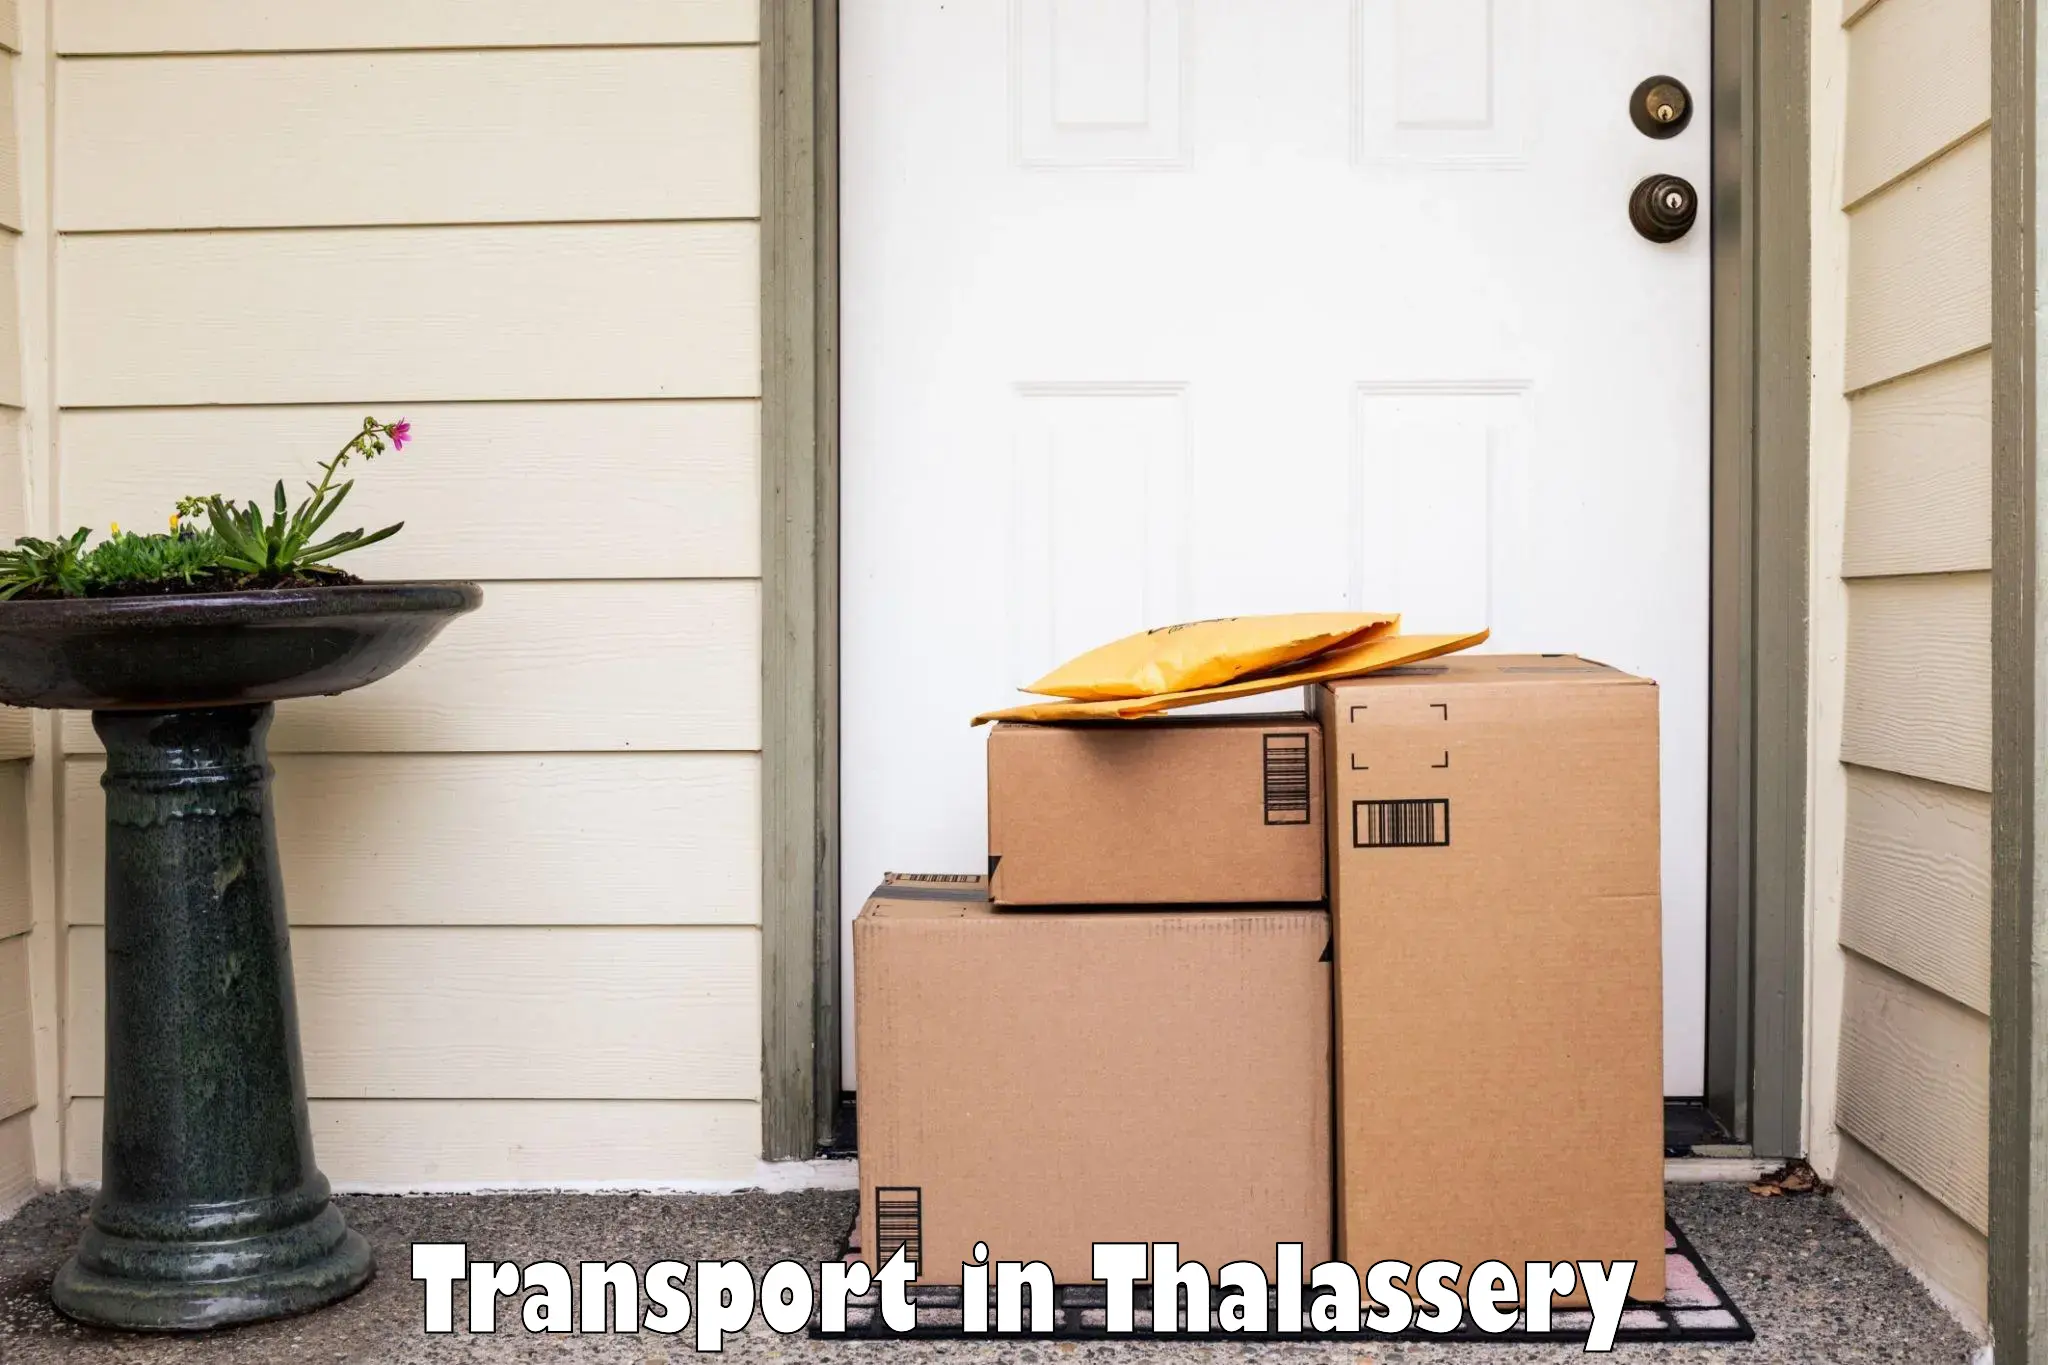 Vehicle transport services in Thalassery